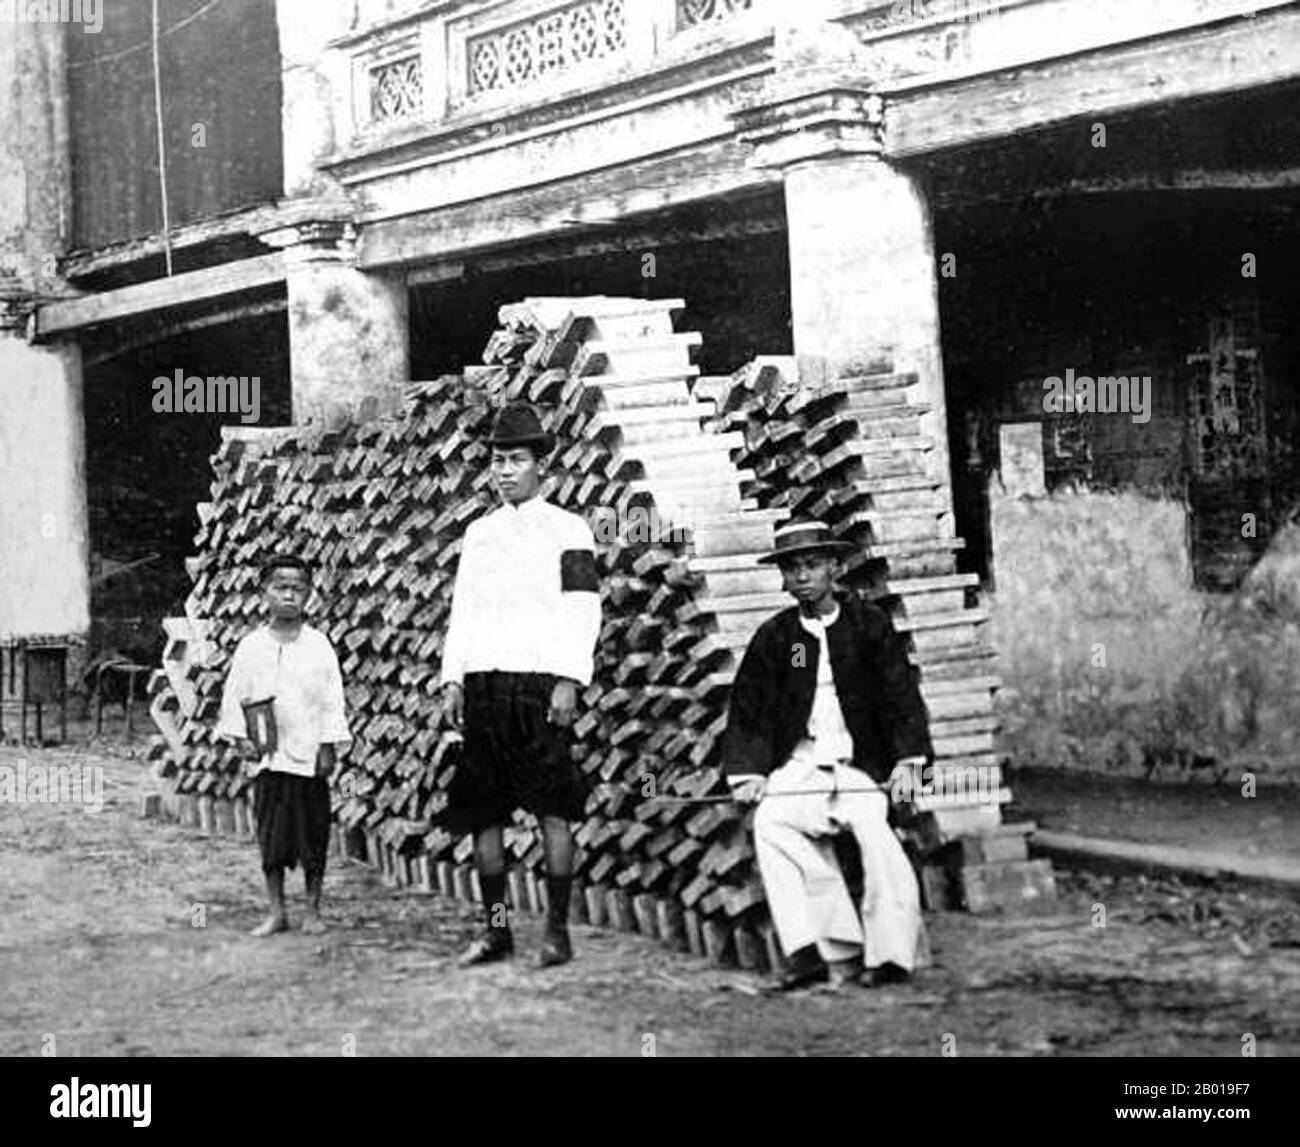 Thailand: Tin miners stand beside a pile of tin ingots stacked in front of a commercial shophouse in Phuket town, c. 1900.  Tin was discovered several centuries ago in the Kathu district of Phuket and was mined until 1992 when the last mine on Phuket closed. The tin business drew migrant workers from South China to Phuket, and many of these Overseas Chinese settled permanently in the area. Stock Photo